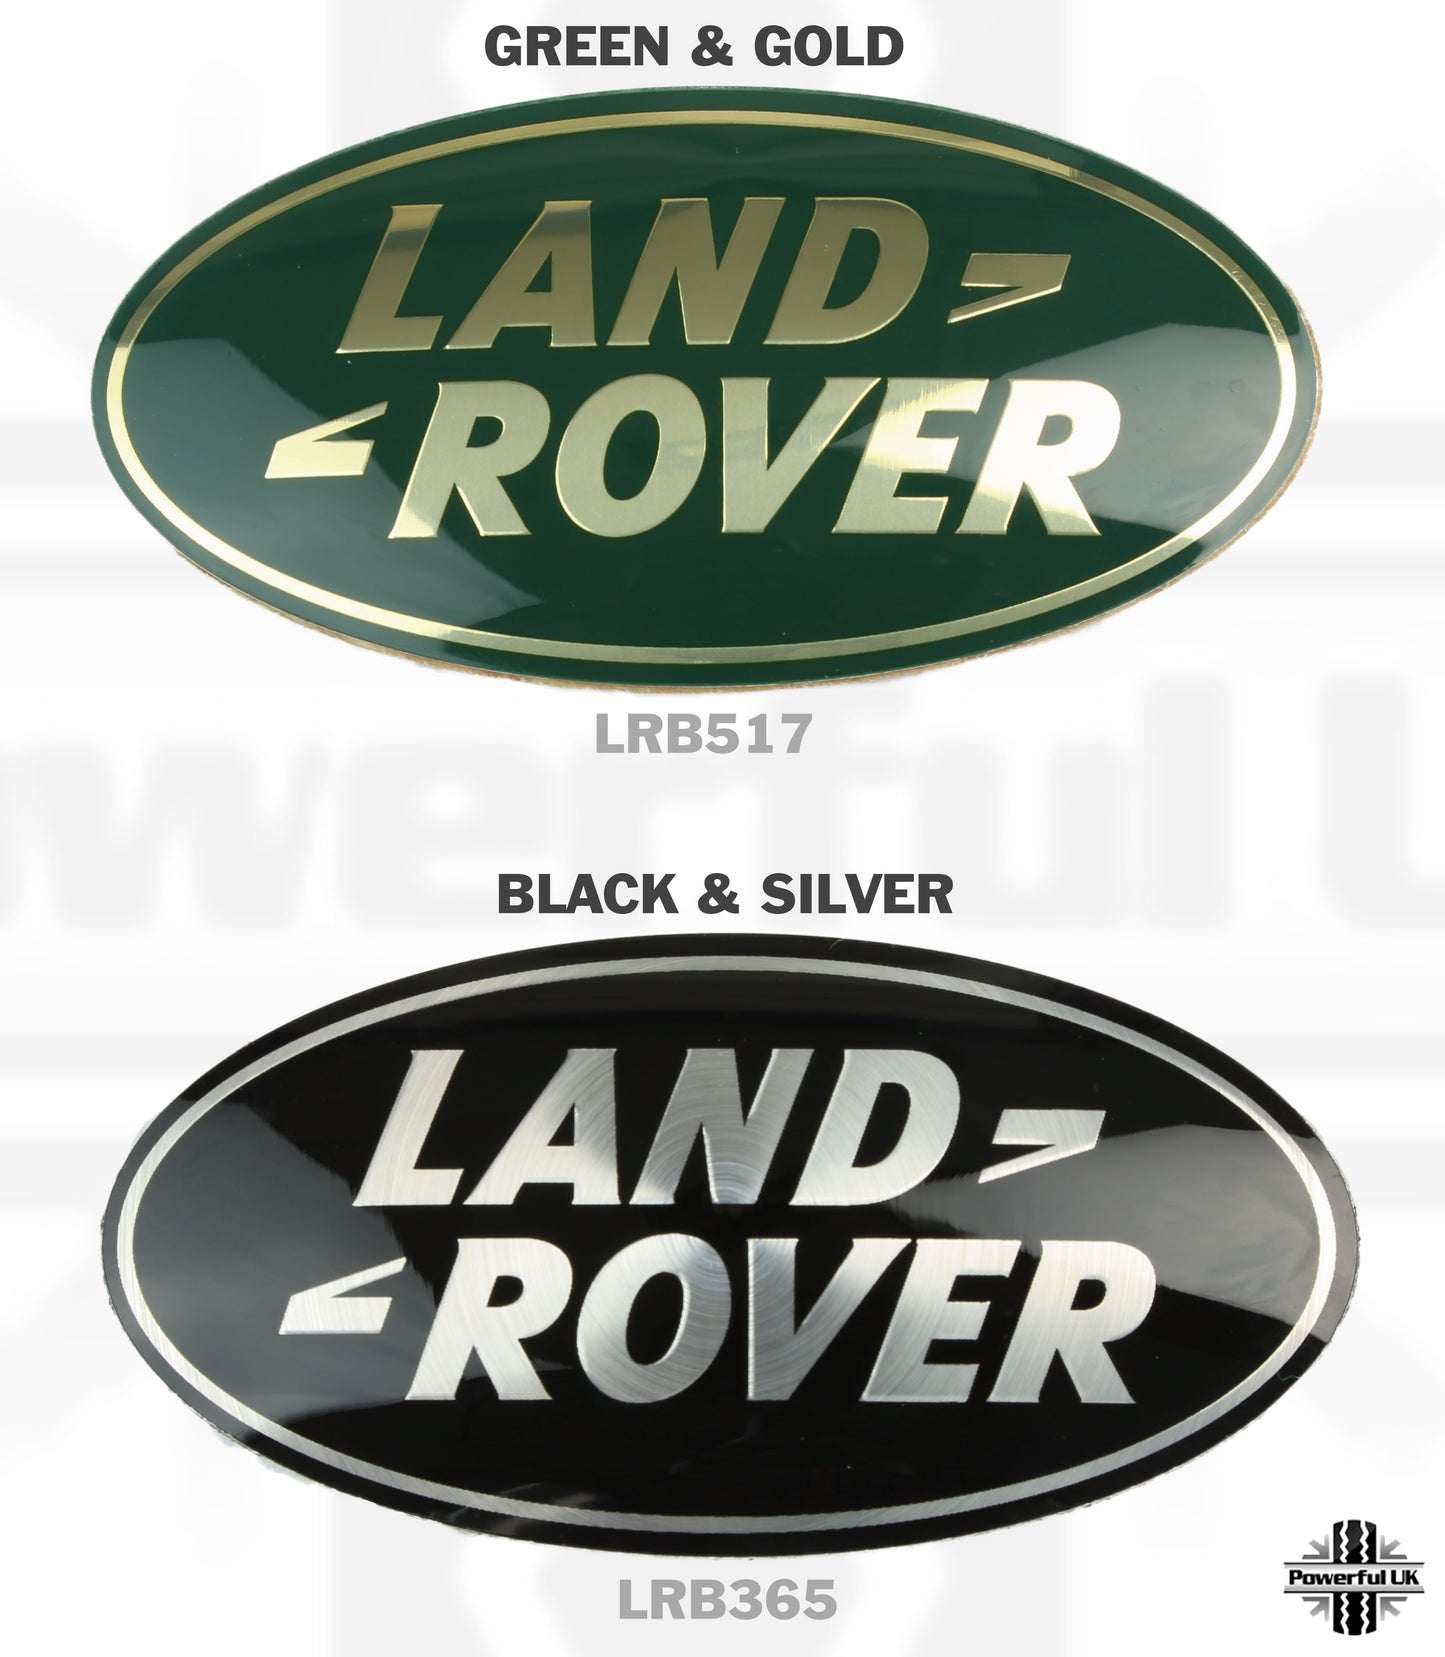 Genuine Front Grille Badge - Green & Gold - for Range Rover P38